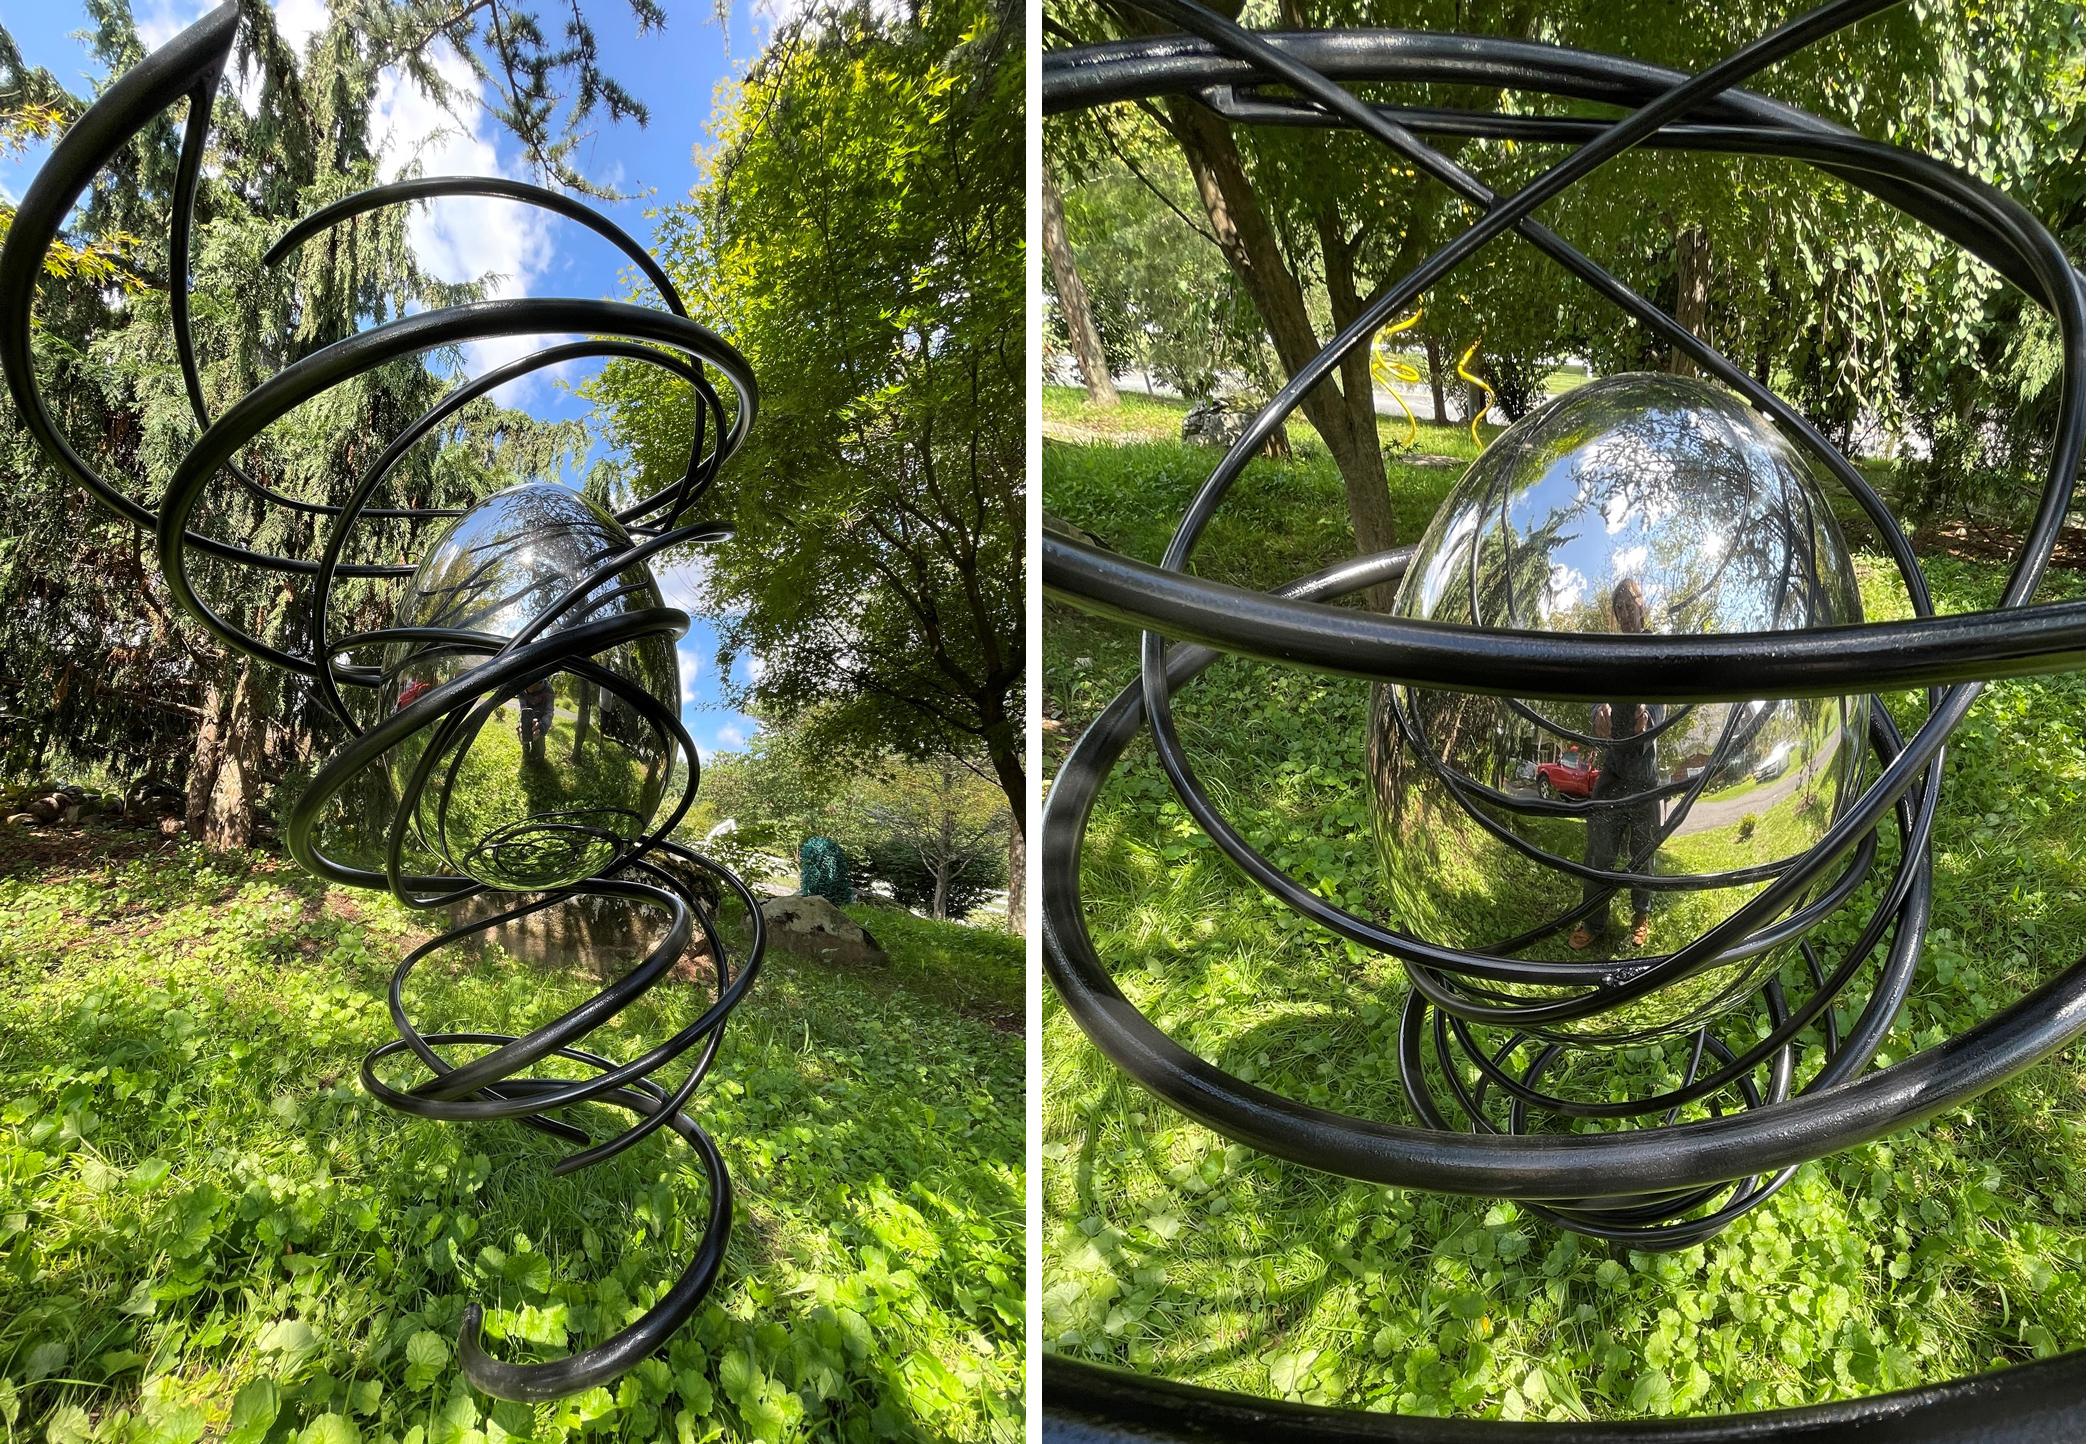 A mirror polished stainless steel egg reflects its environment while the steel "tornado" holds the egg up to create more drama. Beautiful in the garden!
One of a kind and signed by the artist.
Other sizes available by commission. Veuillez vous